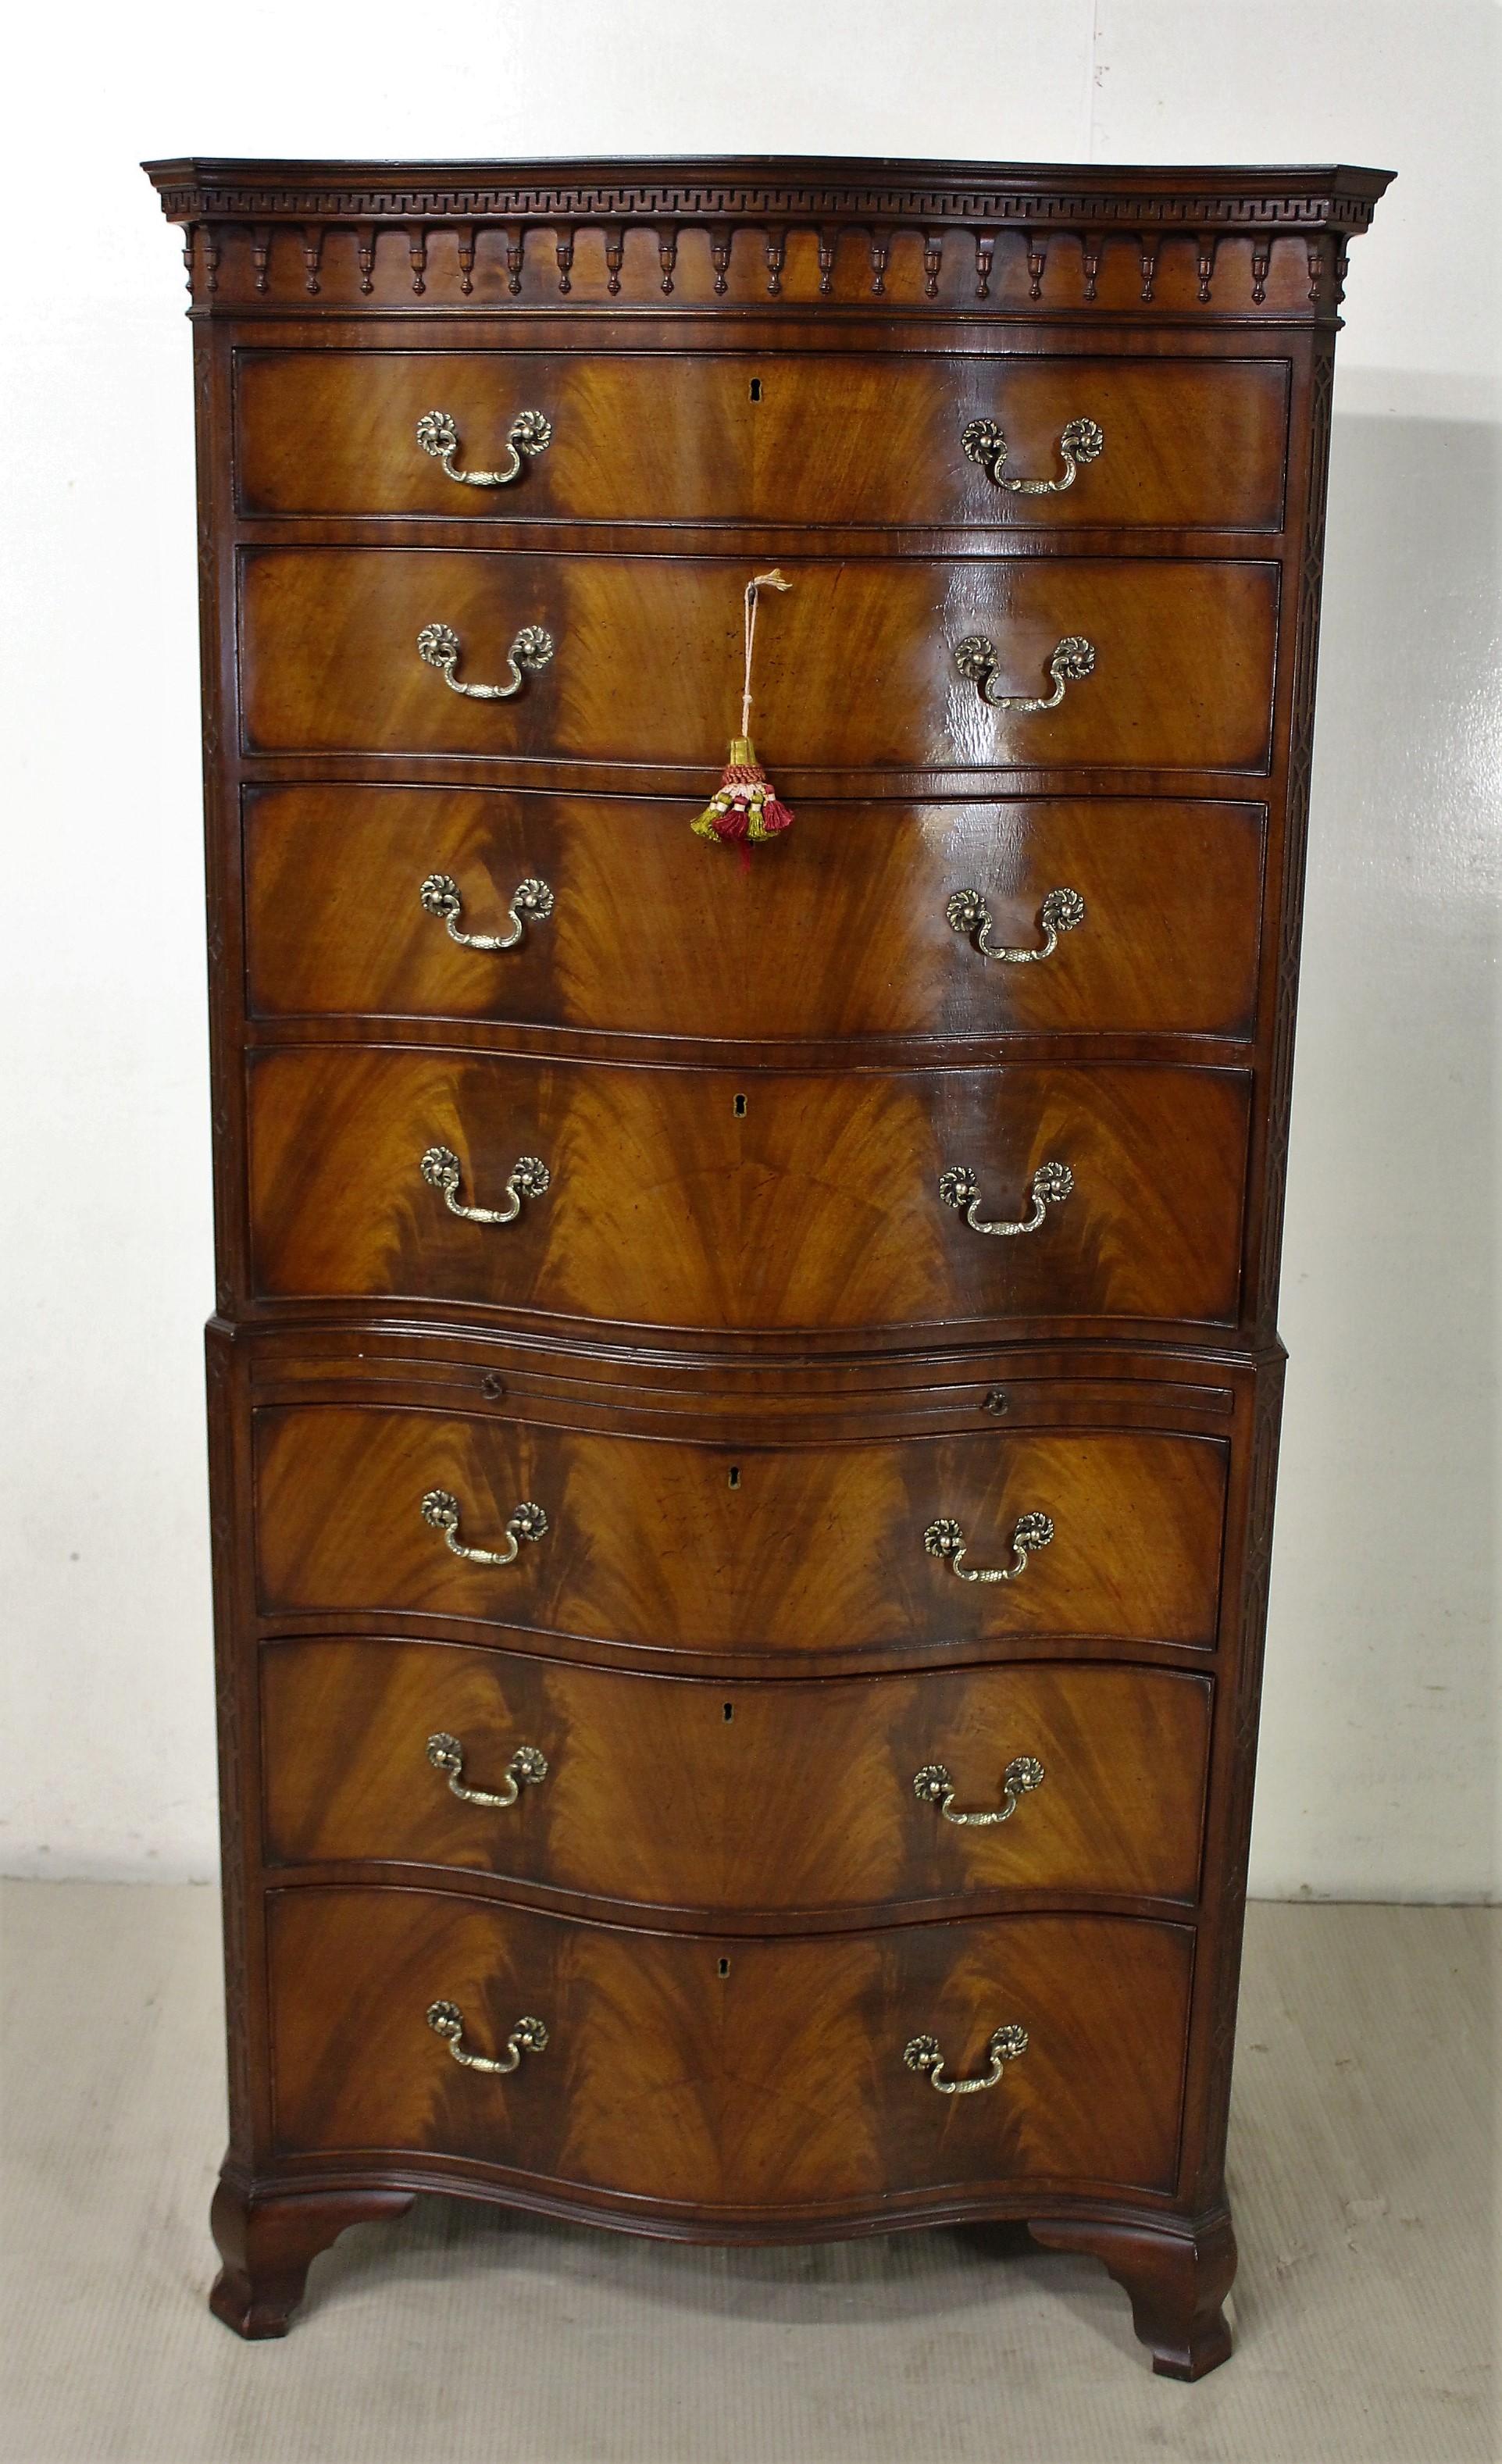 A splendid flame mahogany serpentine fronted chest on chest, or tallboy, in the manner of Thomas Chippendale. Well constructed in solid mahogany with attractive flame mahogany veneers. The cornice with Greek key moldings and drop pendants. With